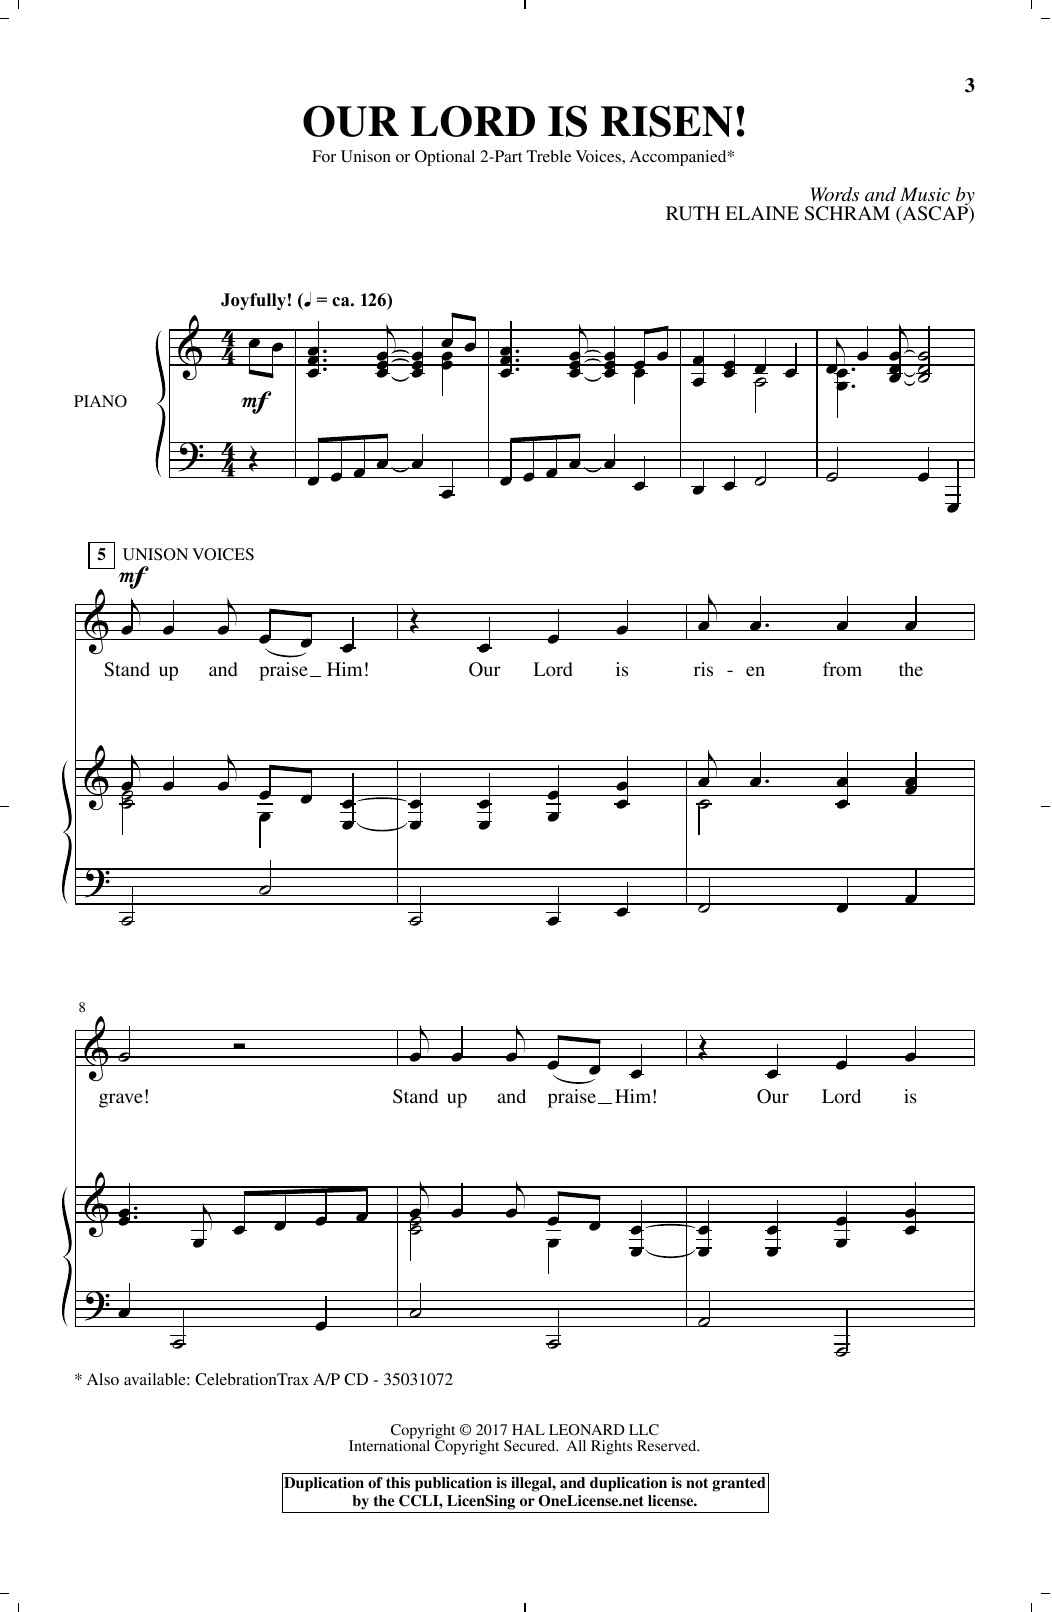 Download Ruth Elaine Schram Our Lord Is Risen Sheet Music